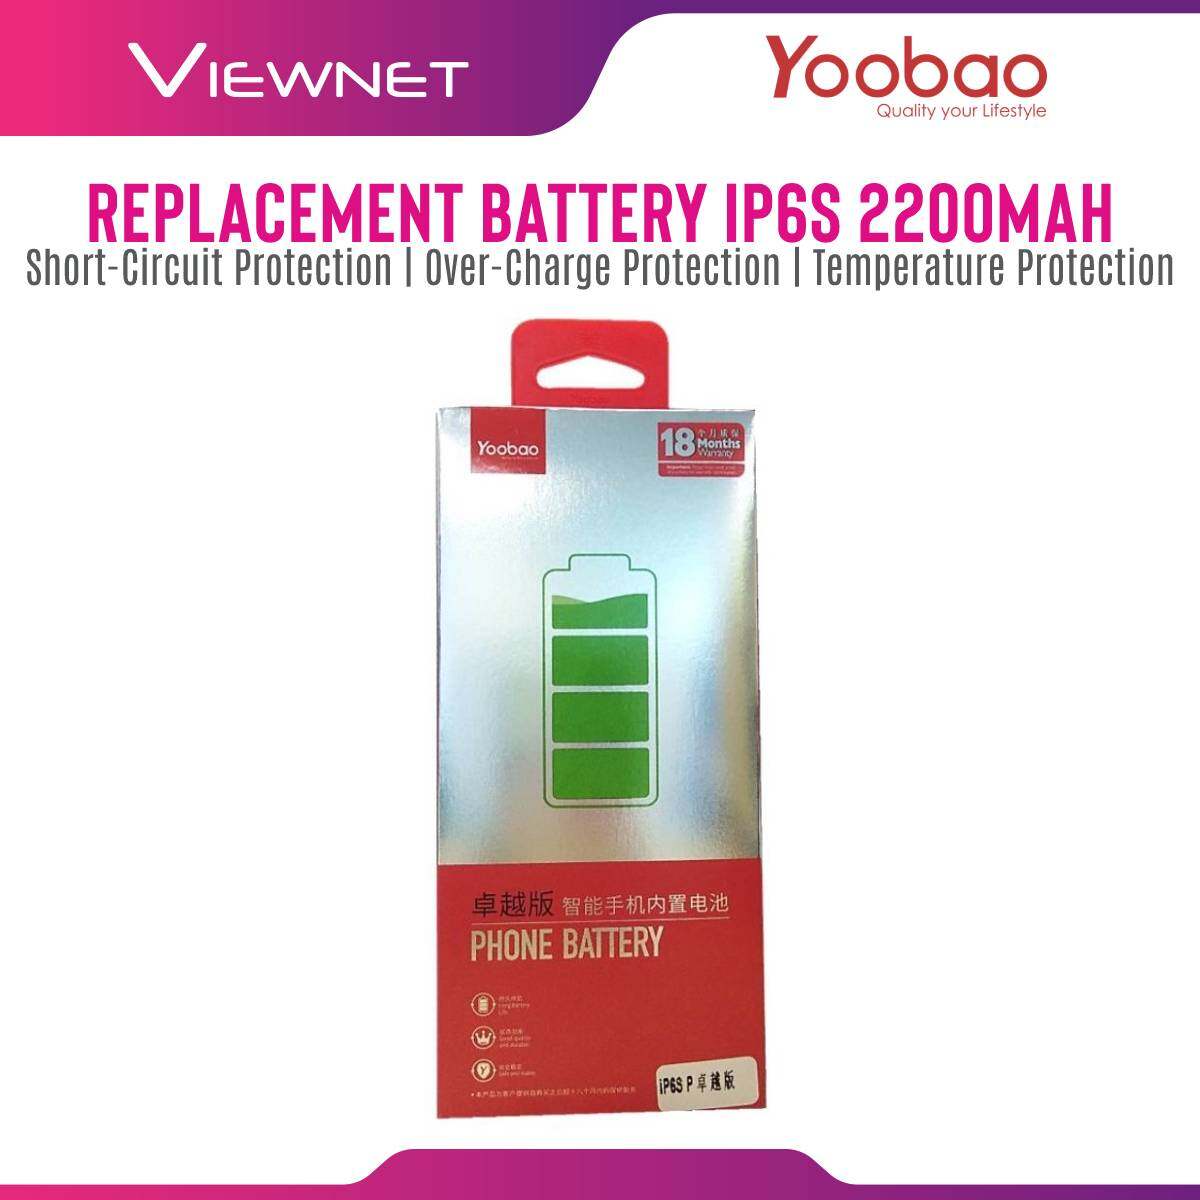 Yoobao 2200mAh ATL Version iPhone 6S Replacement Phone Battery Long Battery Life with 12 Month Warranty